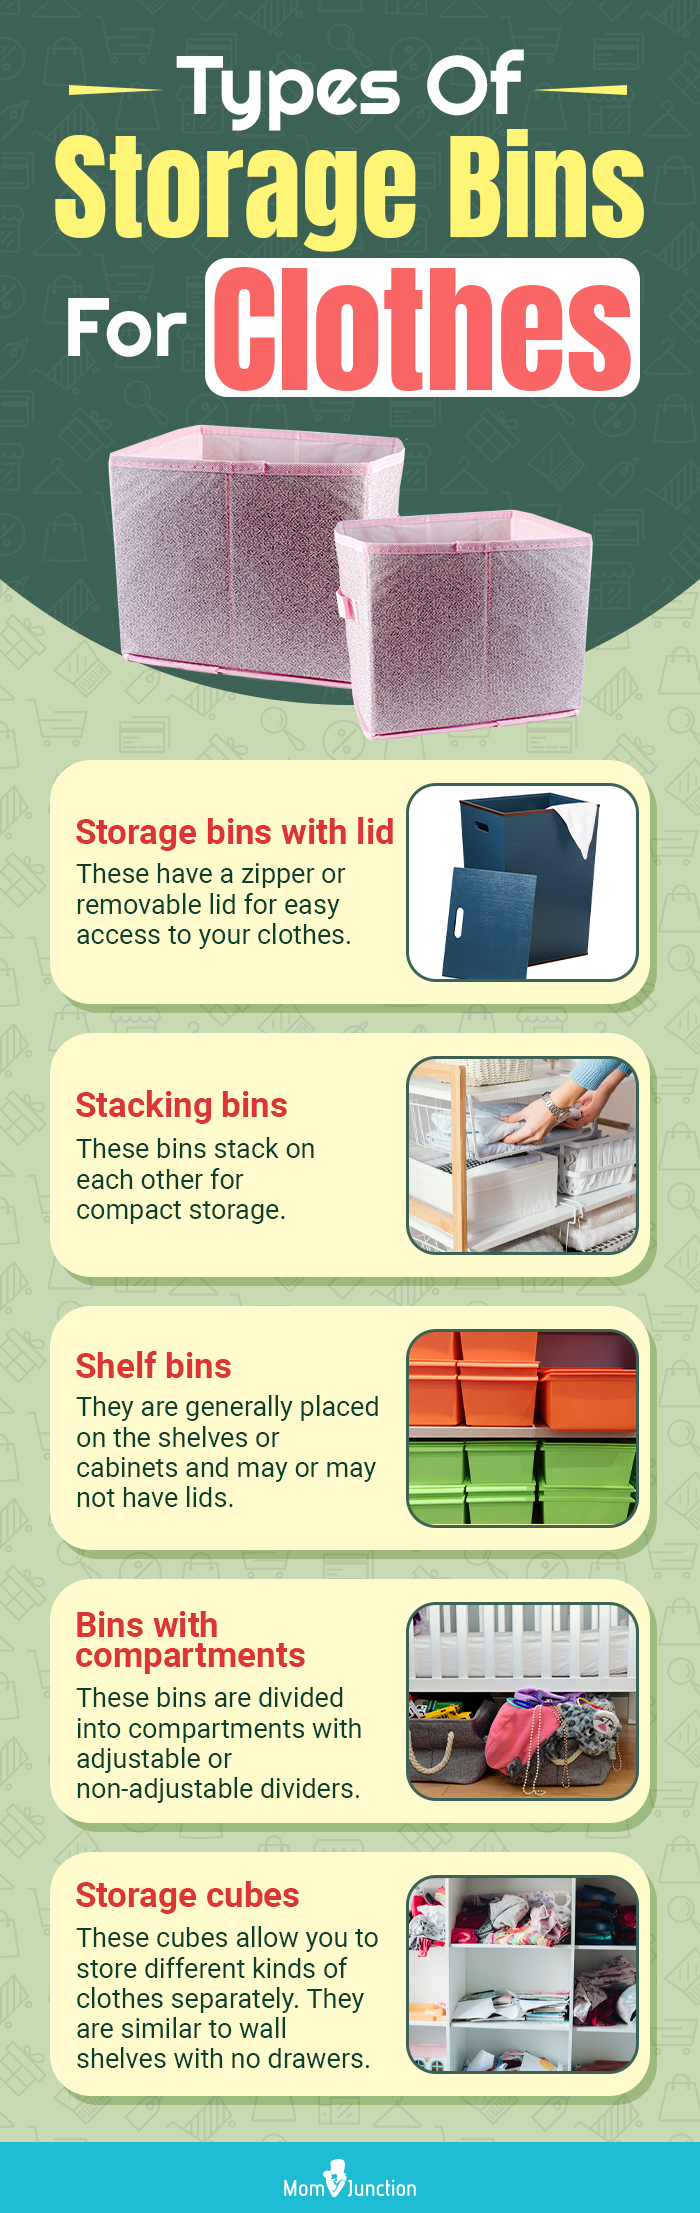 Types Of Storage Bins For Clothes (infographic)